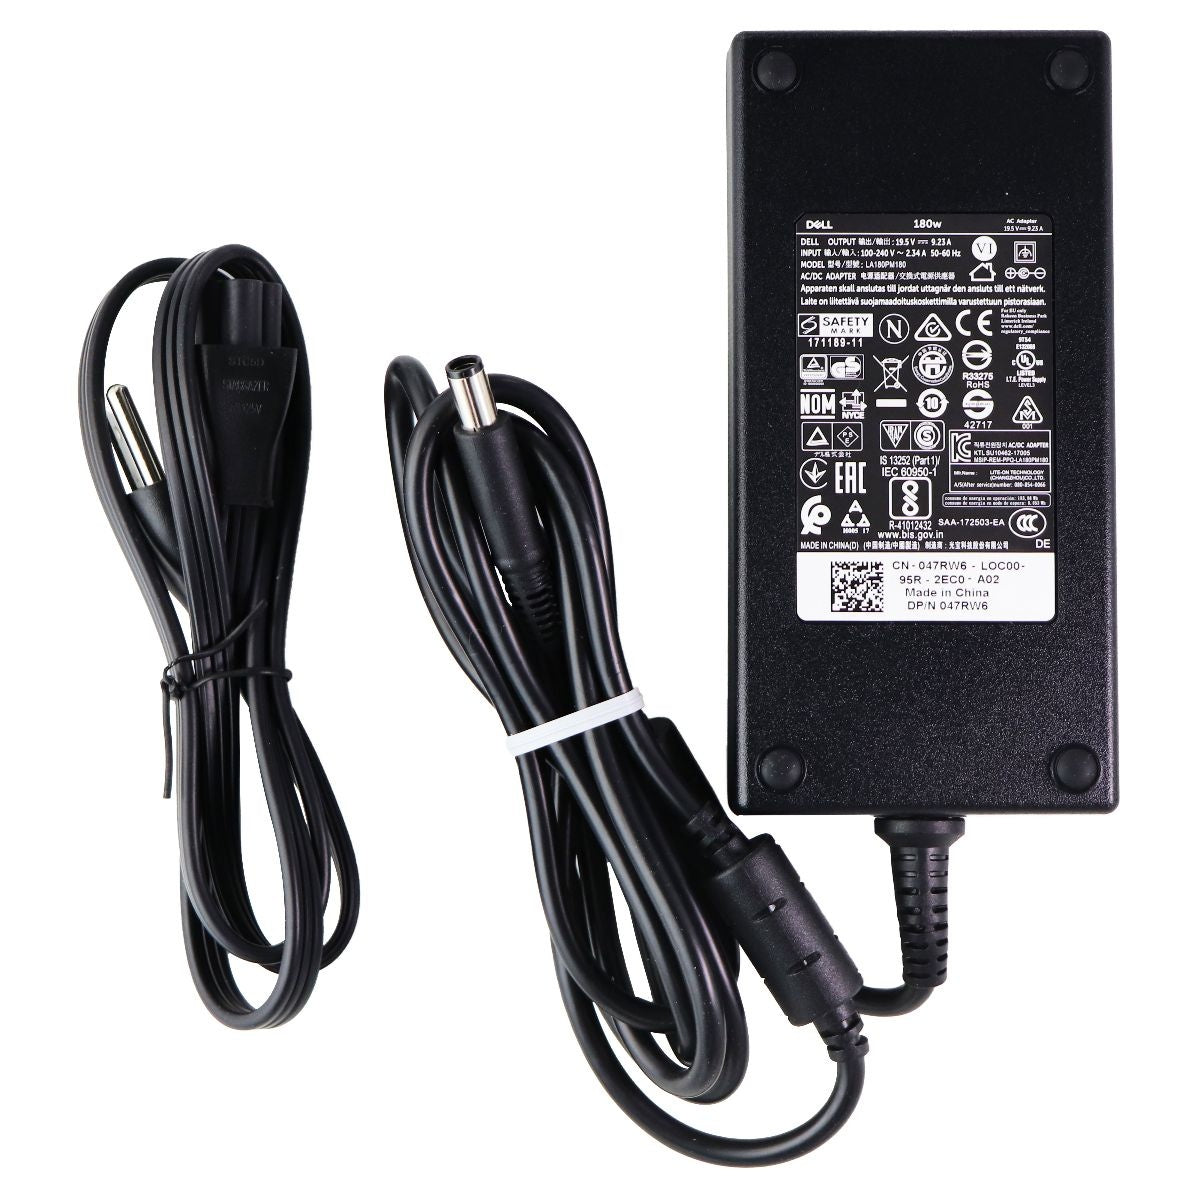 Dell 180W AC/DC Adapter Power Supply OEM Wall Charger - Black (LA180PM180) Computer Accessories - Laptop Power Adapters/Chargers Dell    - Simple Cell Bulk Wholesale Pricing - USA Seller